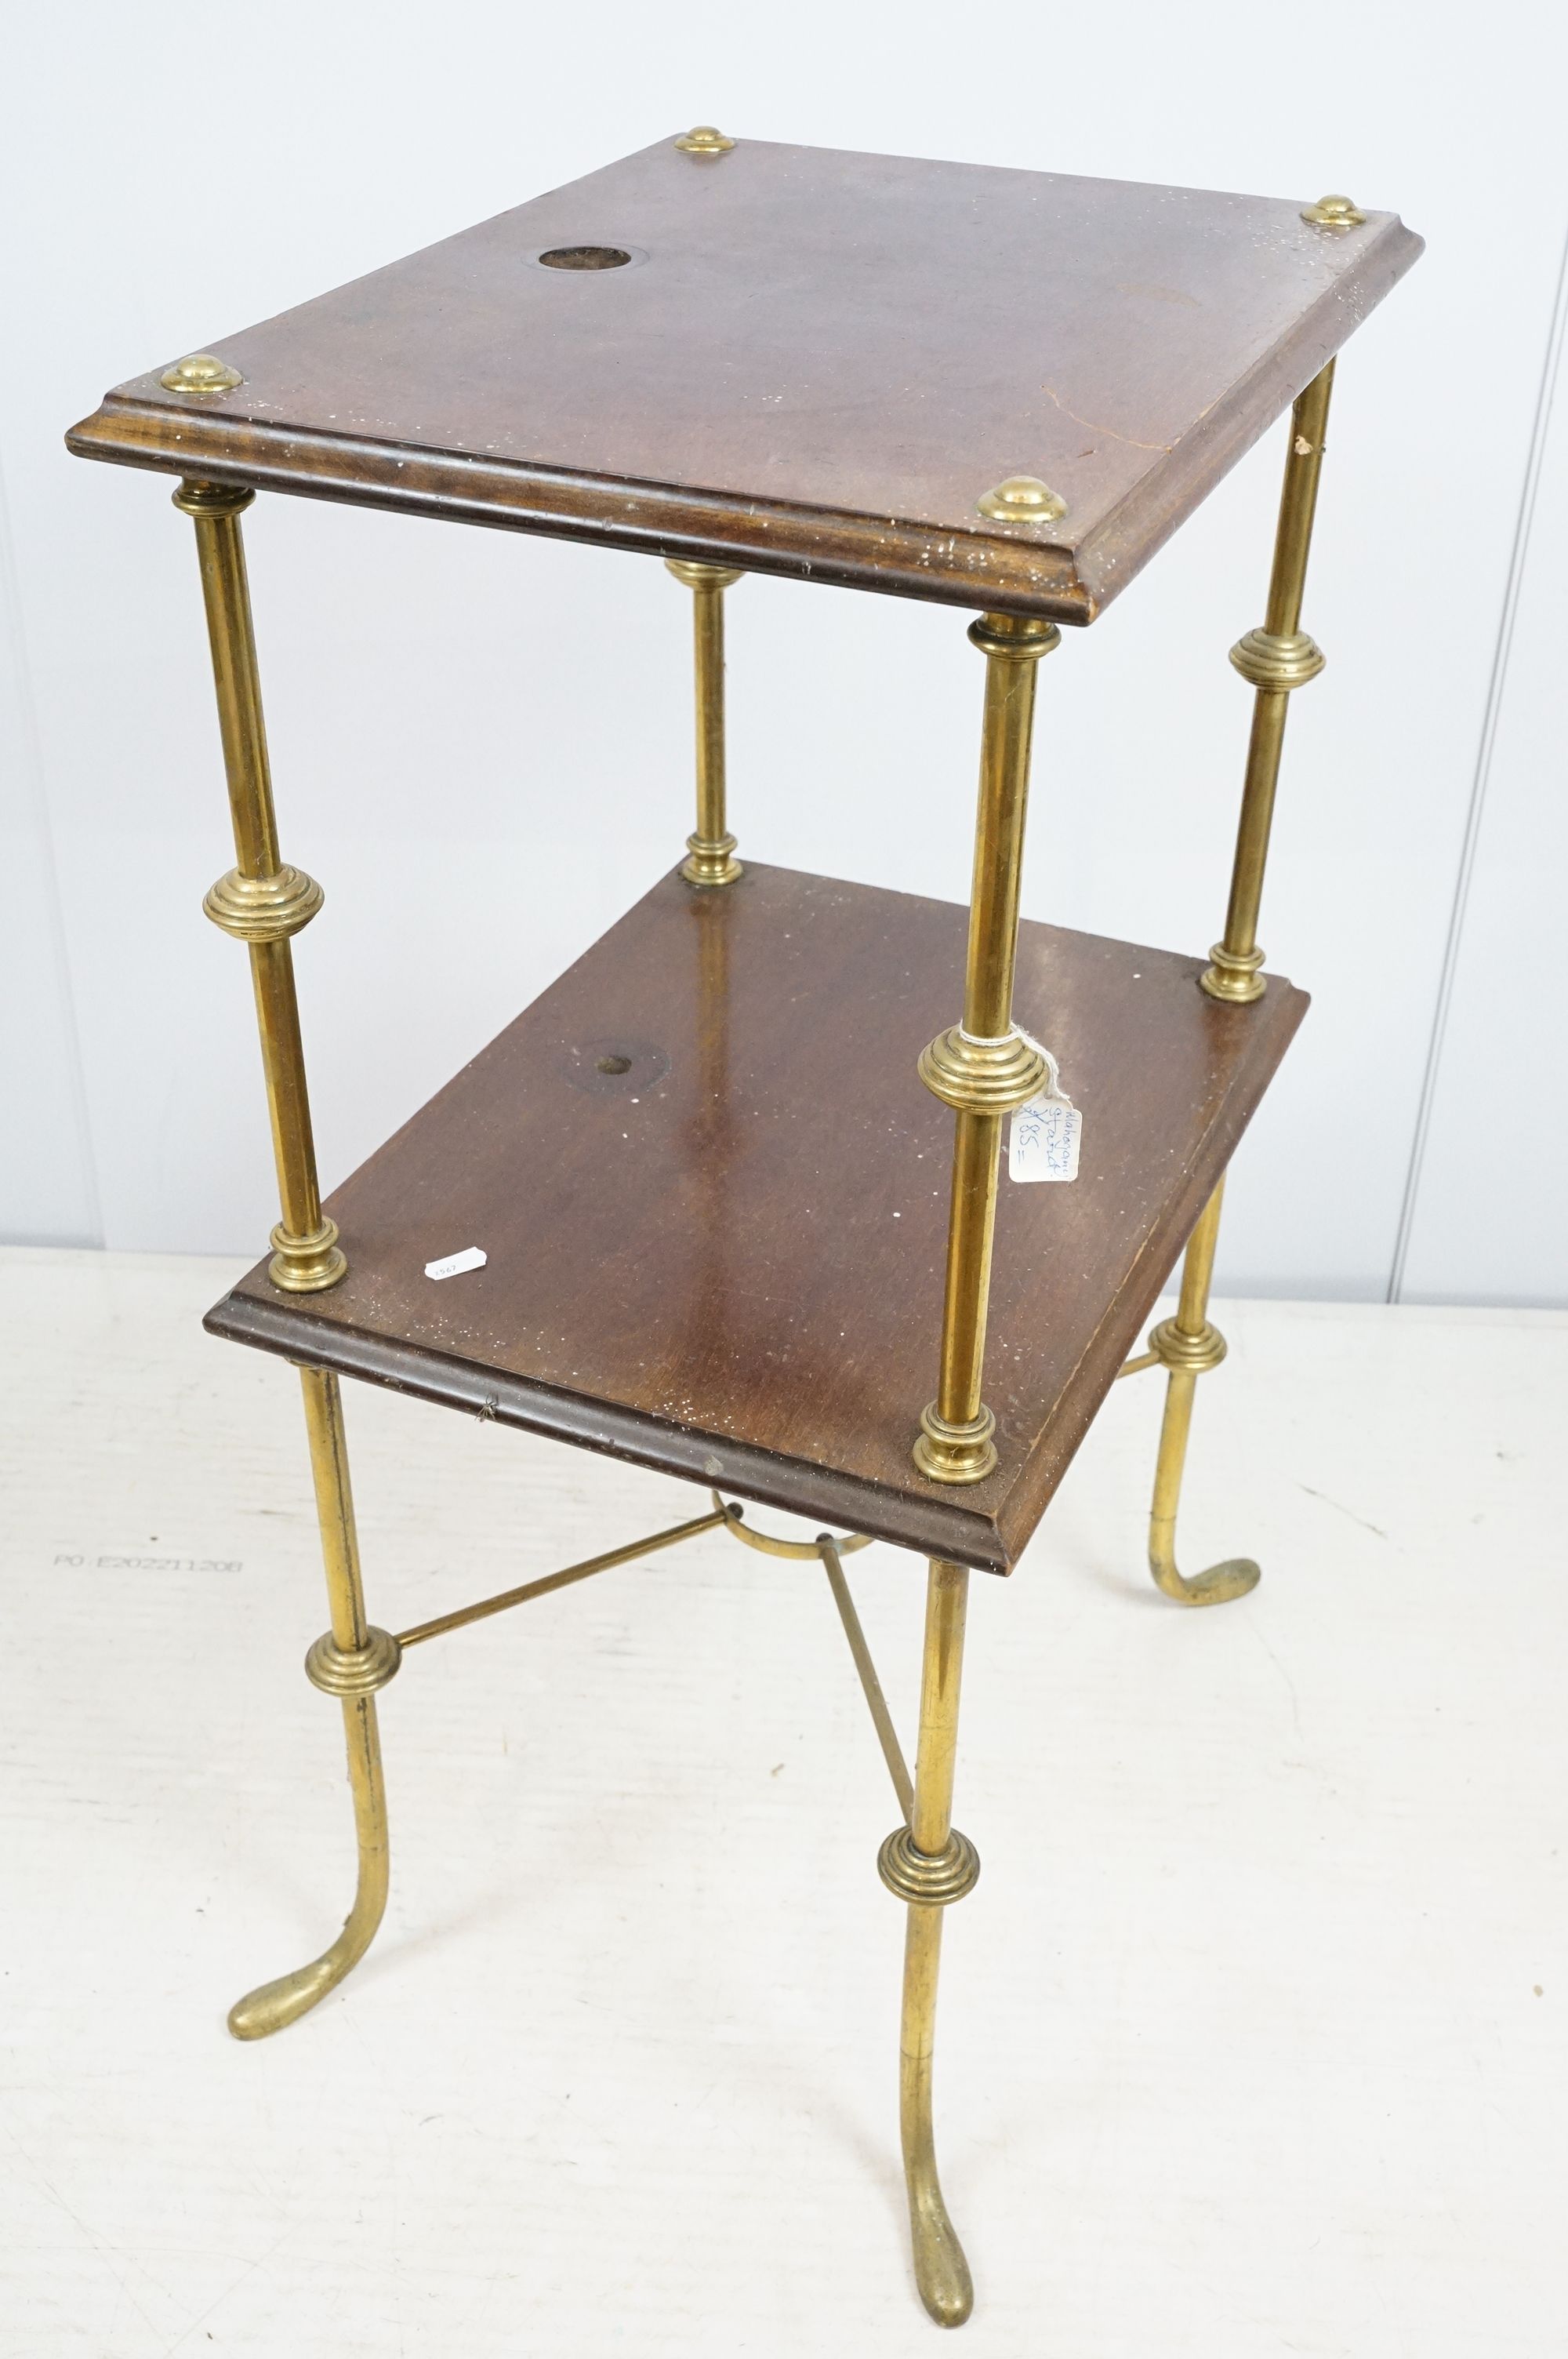 Mahogany two tier table with brass supports and x-stretcher, 80cm high x 45cm wide x 36cm deep - Image 5 of 6